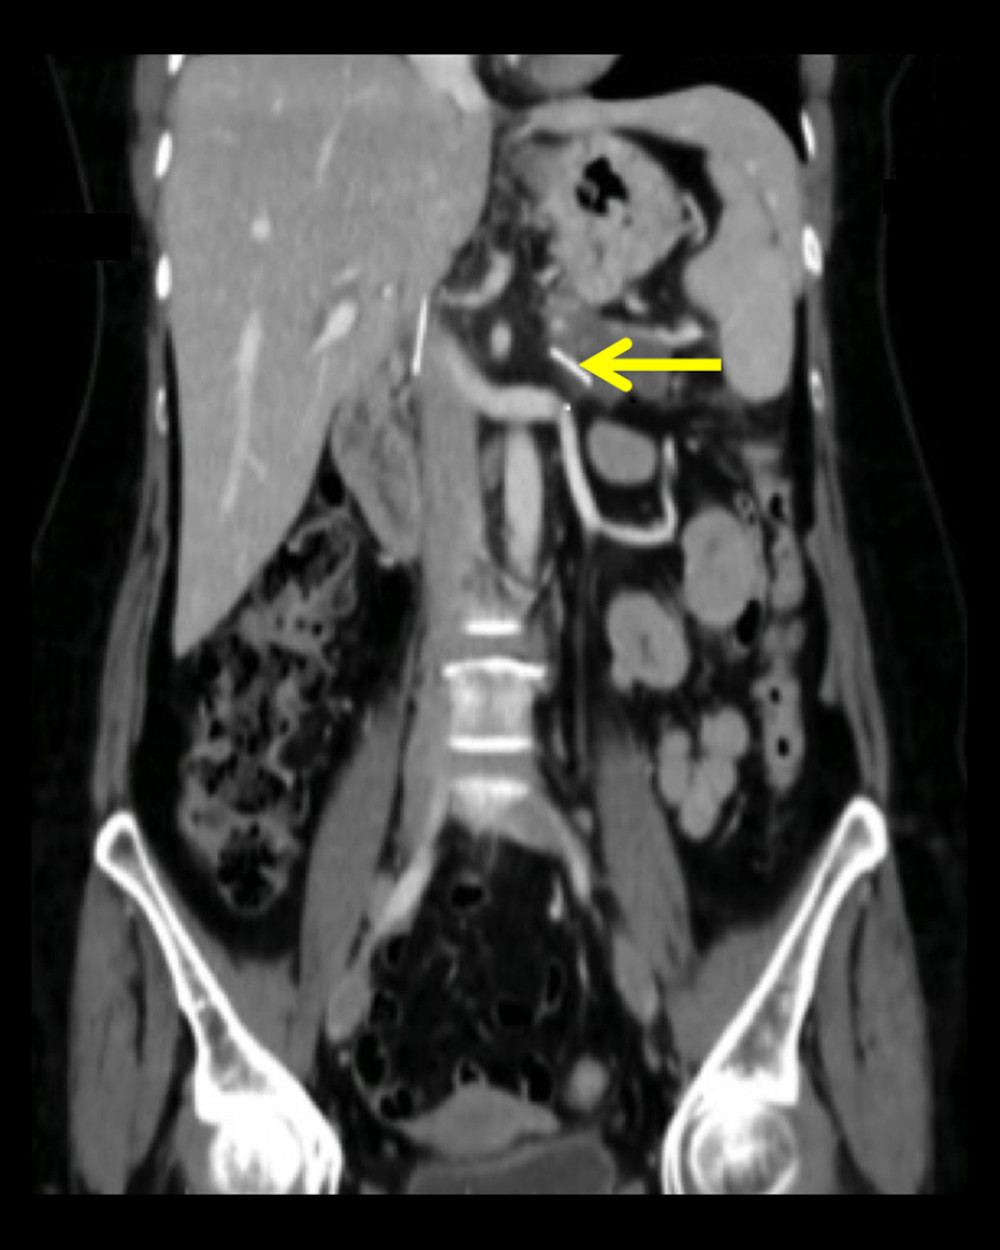 An enhanced CT scan (coronal view) shows the migrated (fractured) IVC filter limb inside the tail of the pancreas (yellow arrow).